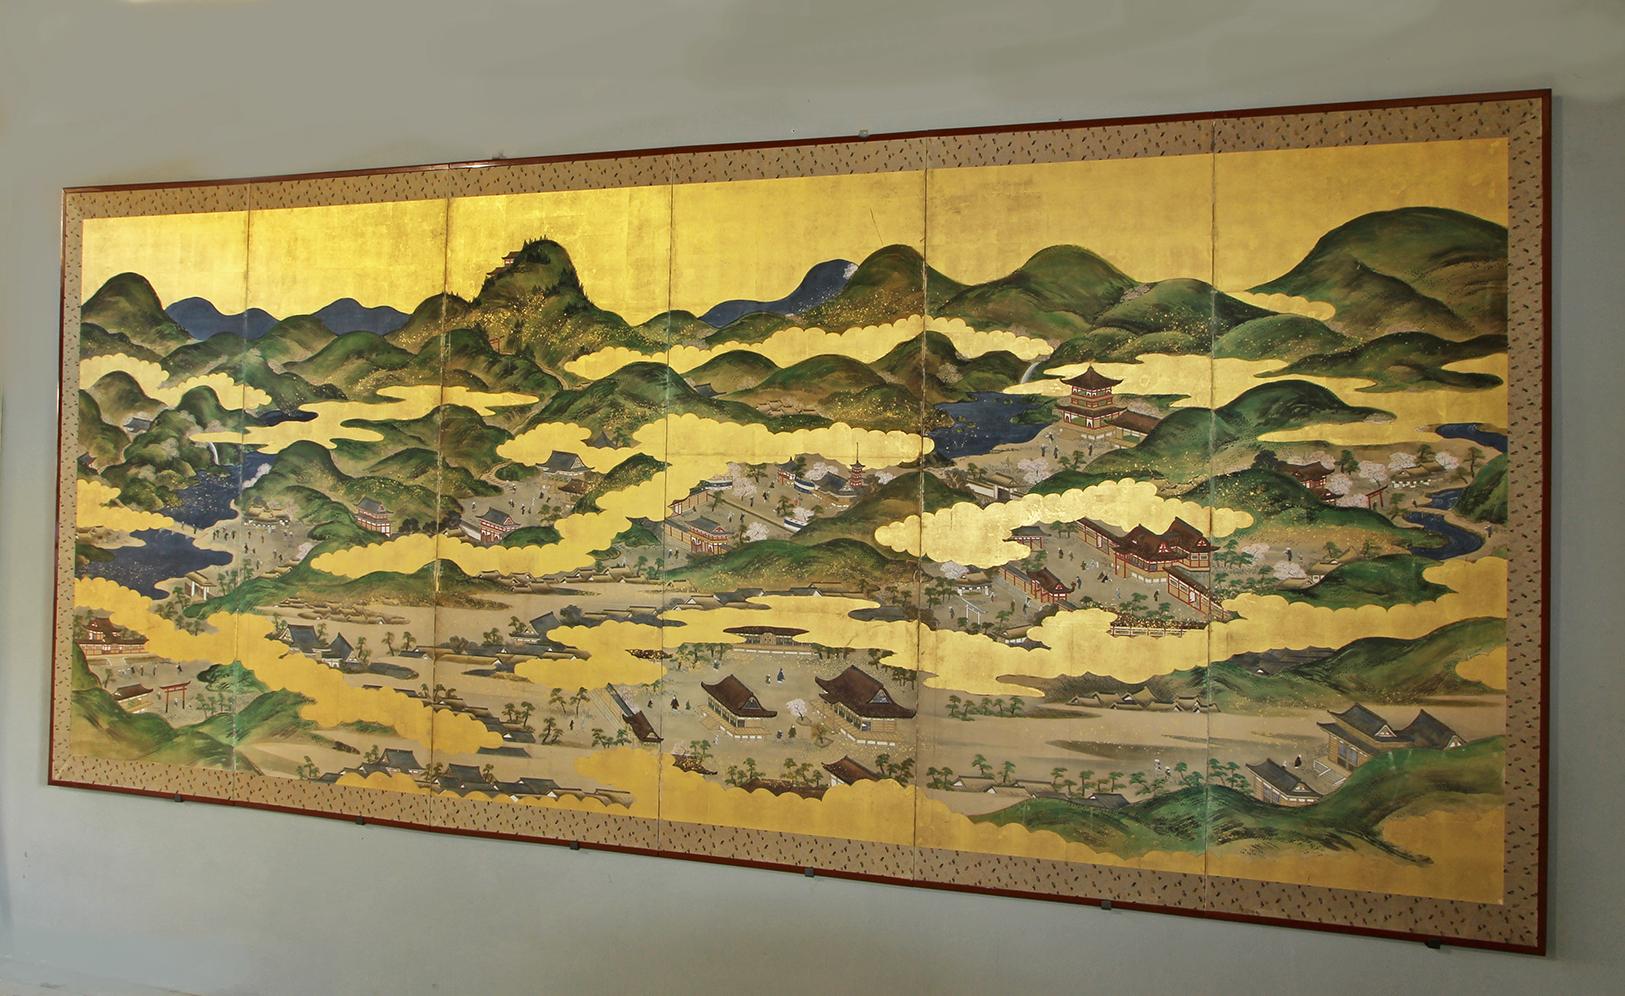 Tosa School, Japanese Folding Screen Kyoto Old Town Landscape 1